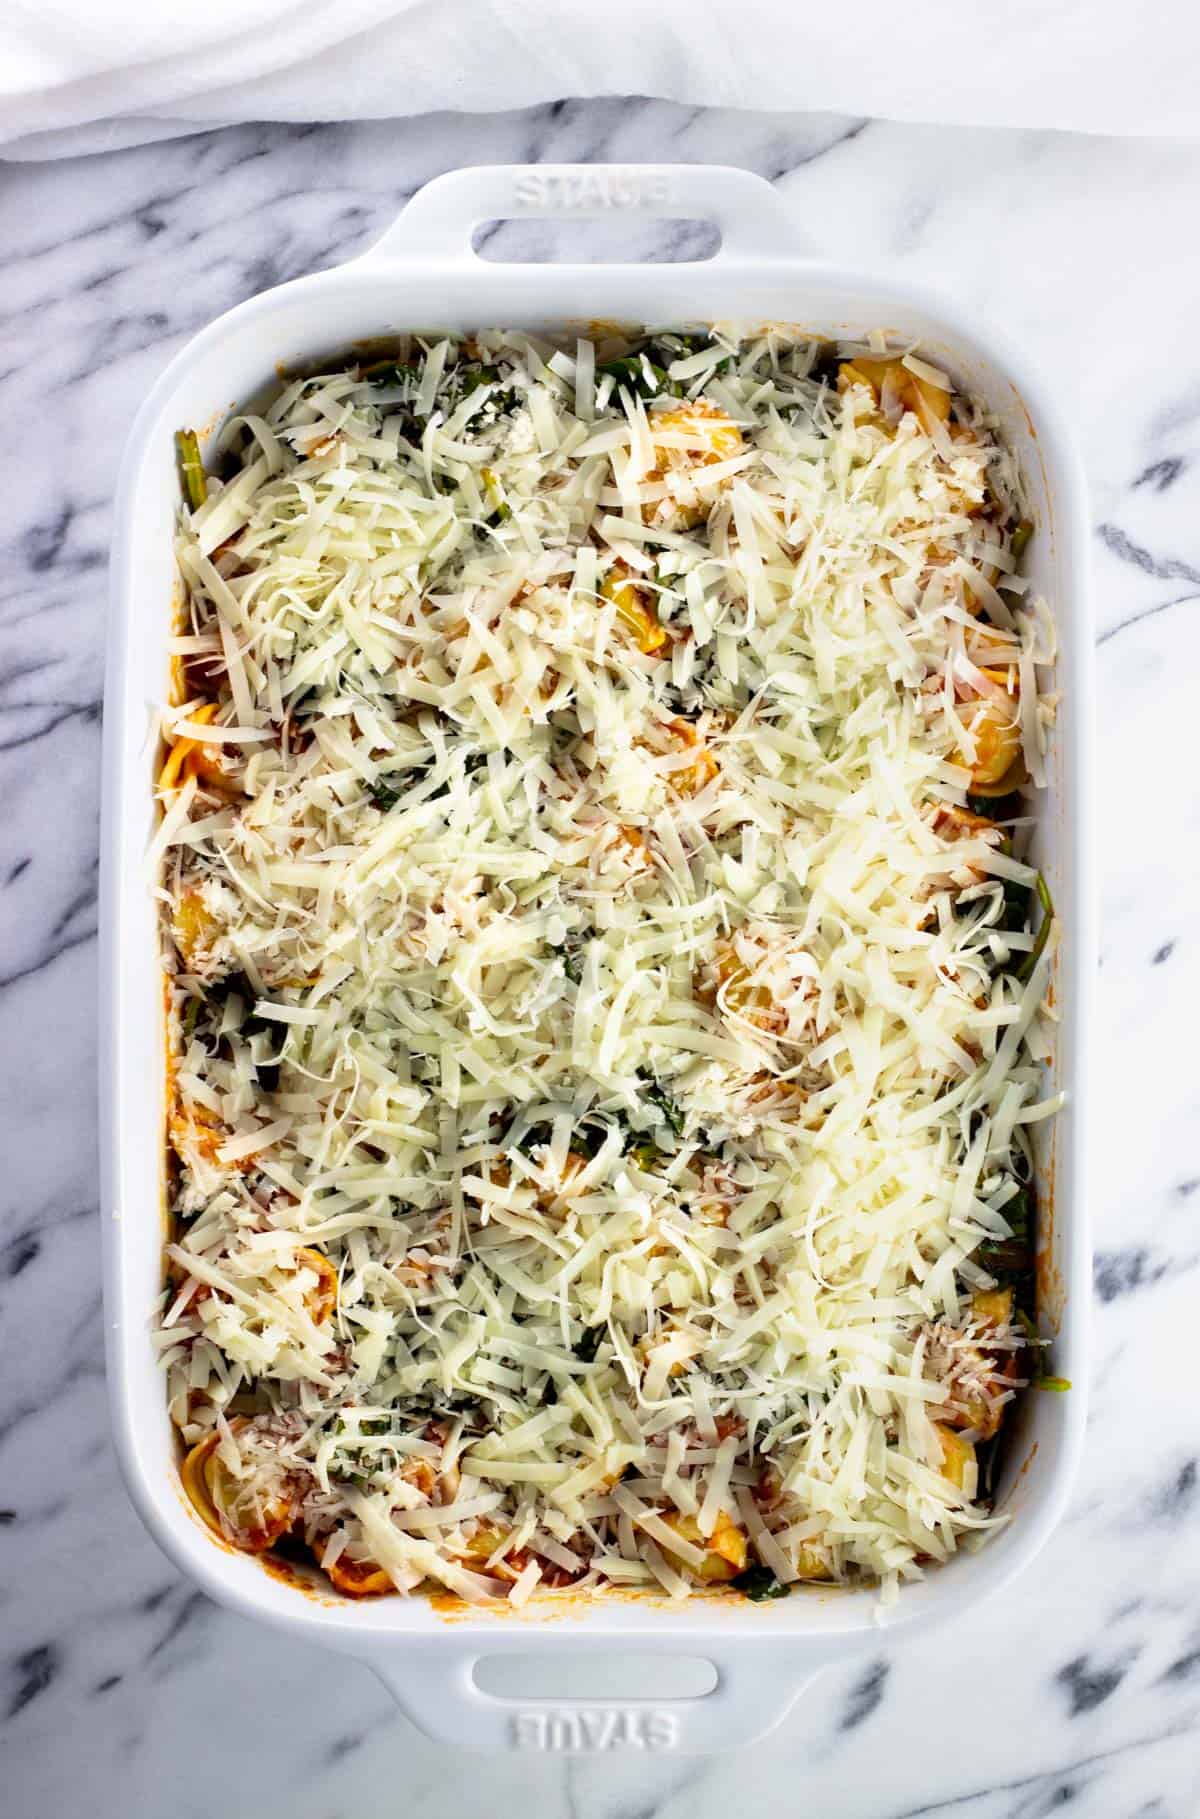 Tortellini, sauce, and spinach added to a baking dish topped with shredded cheeses.